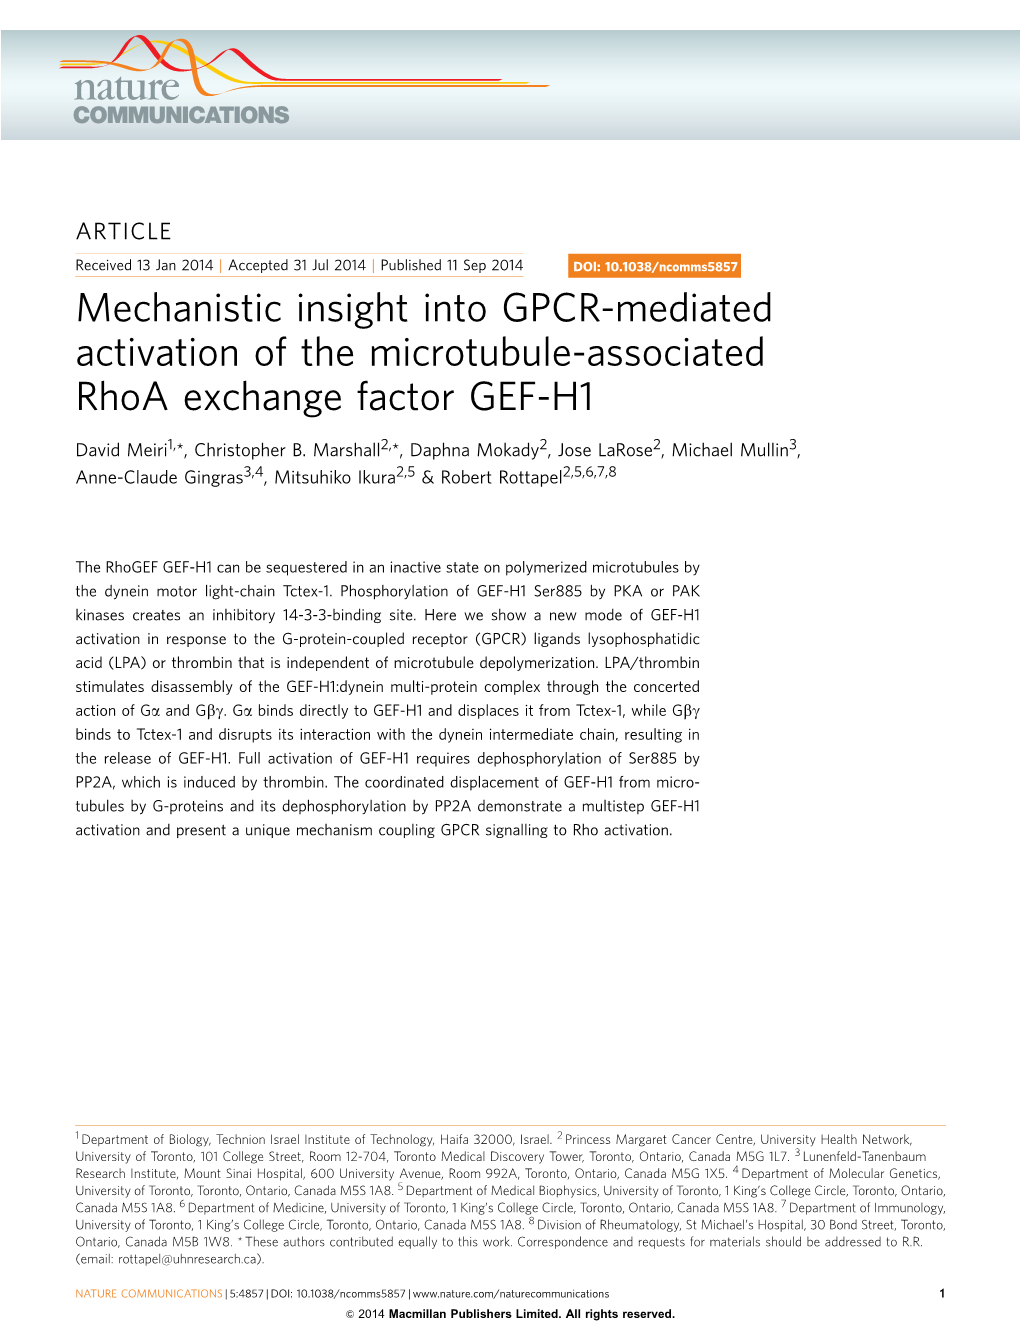 Mechanistic Insight Into GPCR-Mediated Activation of the Microtubule-Associated Rhoa Exchange Factor GEF-H1